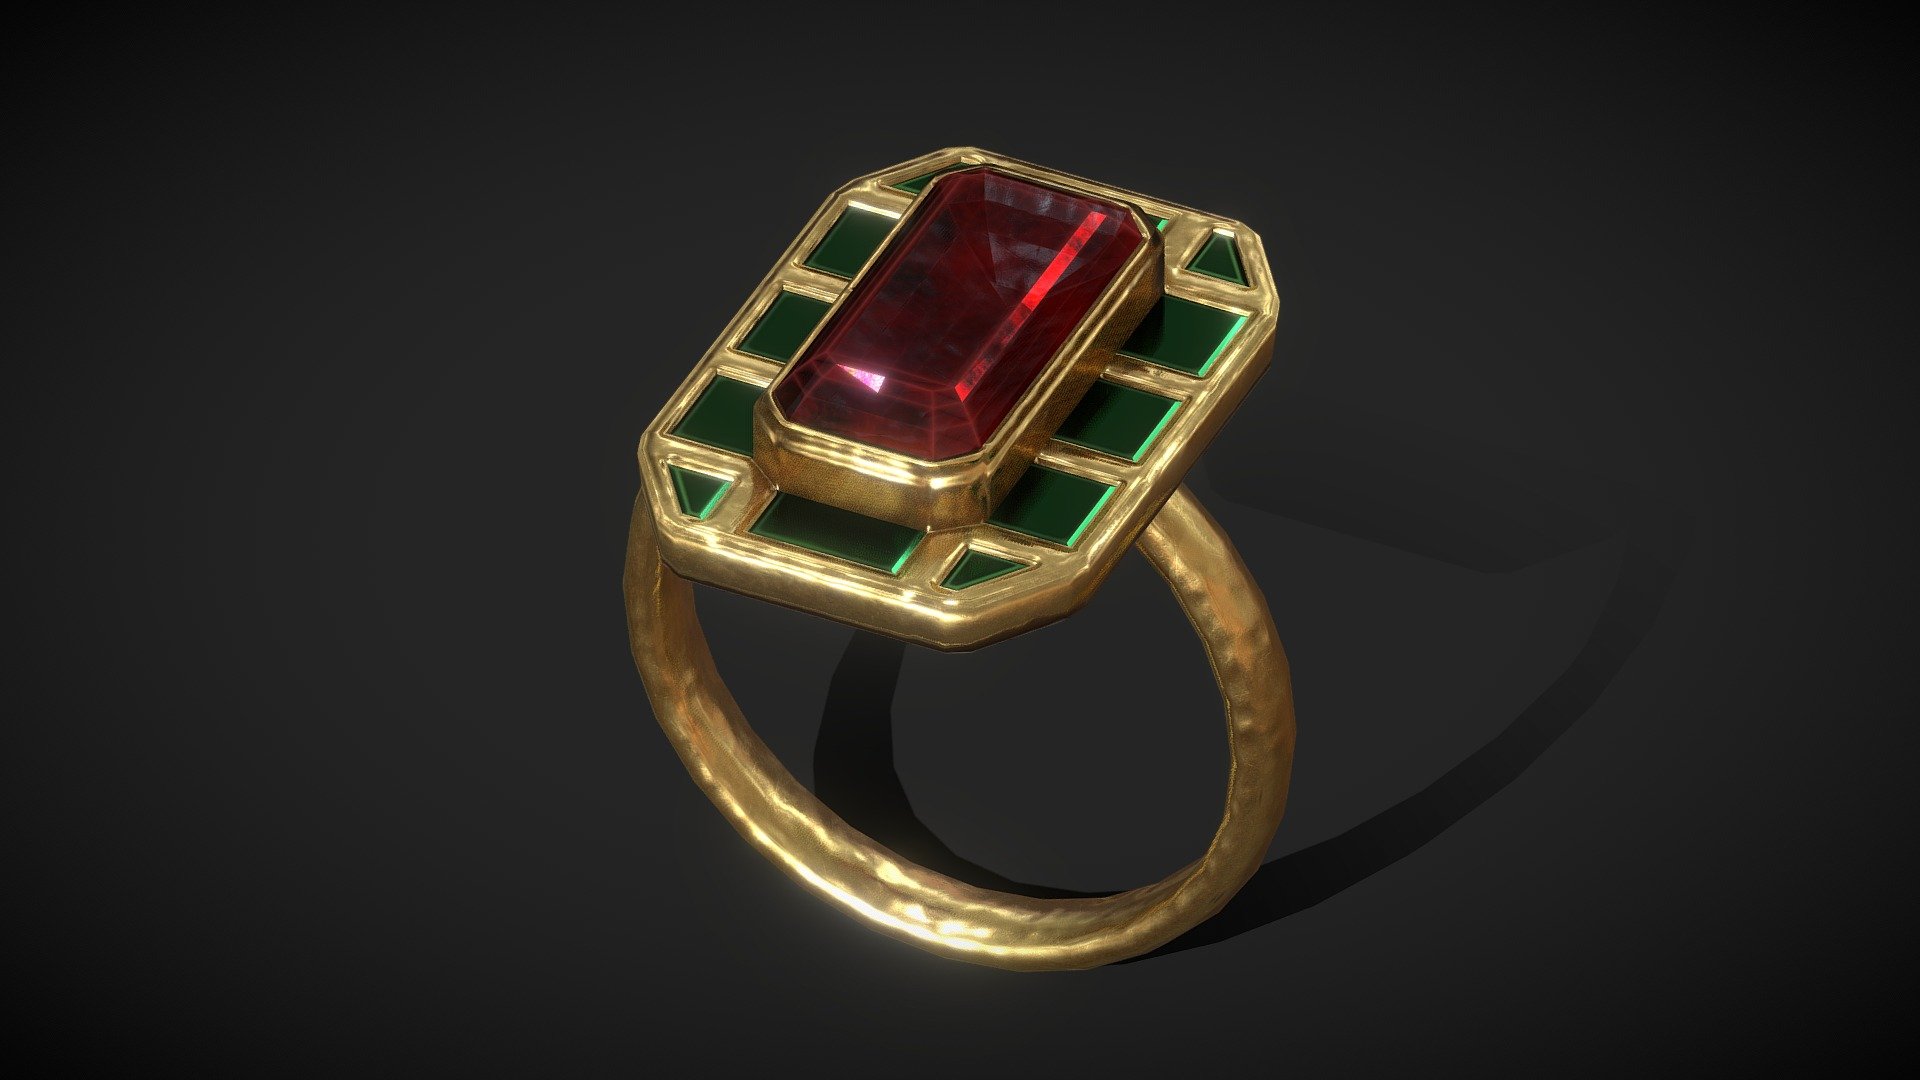 Ruby Emerald Ring / Gemstones Ring - low poly

Triangles: 1.4k
Vertices: 729

4096x4096 PNG texture - Ruby Emerald Ring - low poly - Buy Royalty Free 3D model by Karolina Renkiewicz (@KarolinaRenkiewicz) 3d model